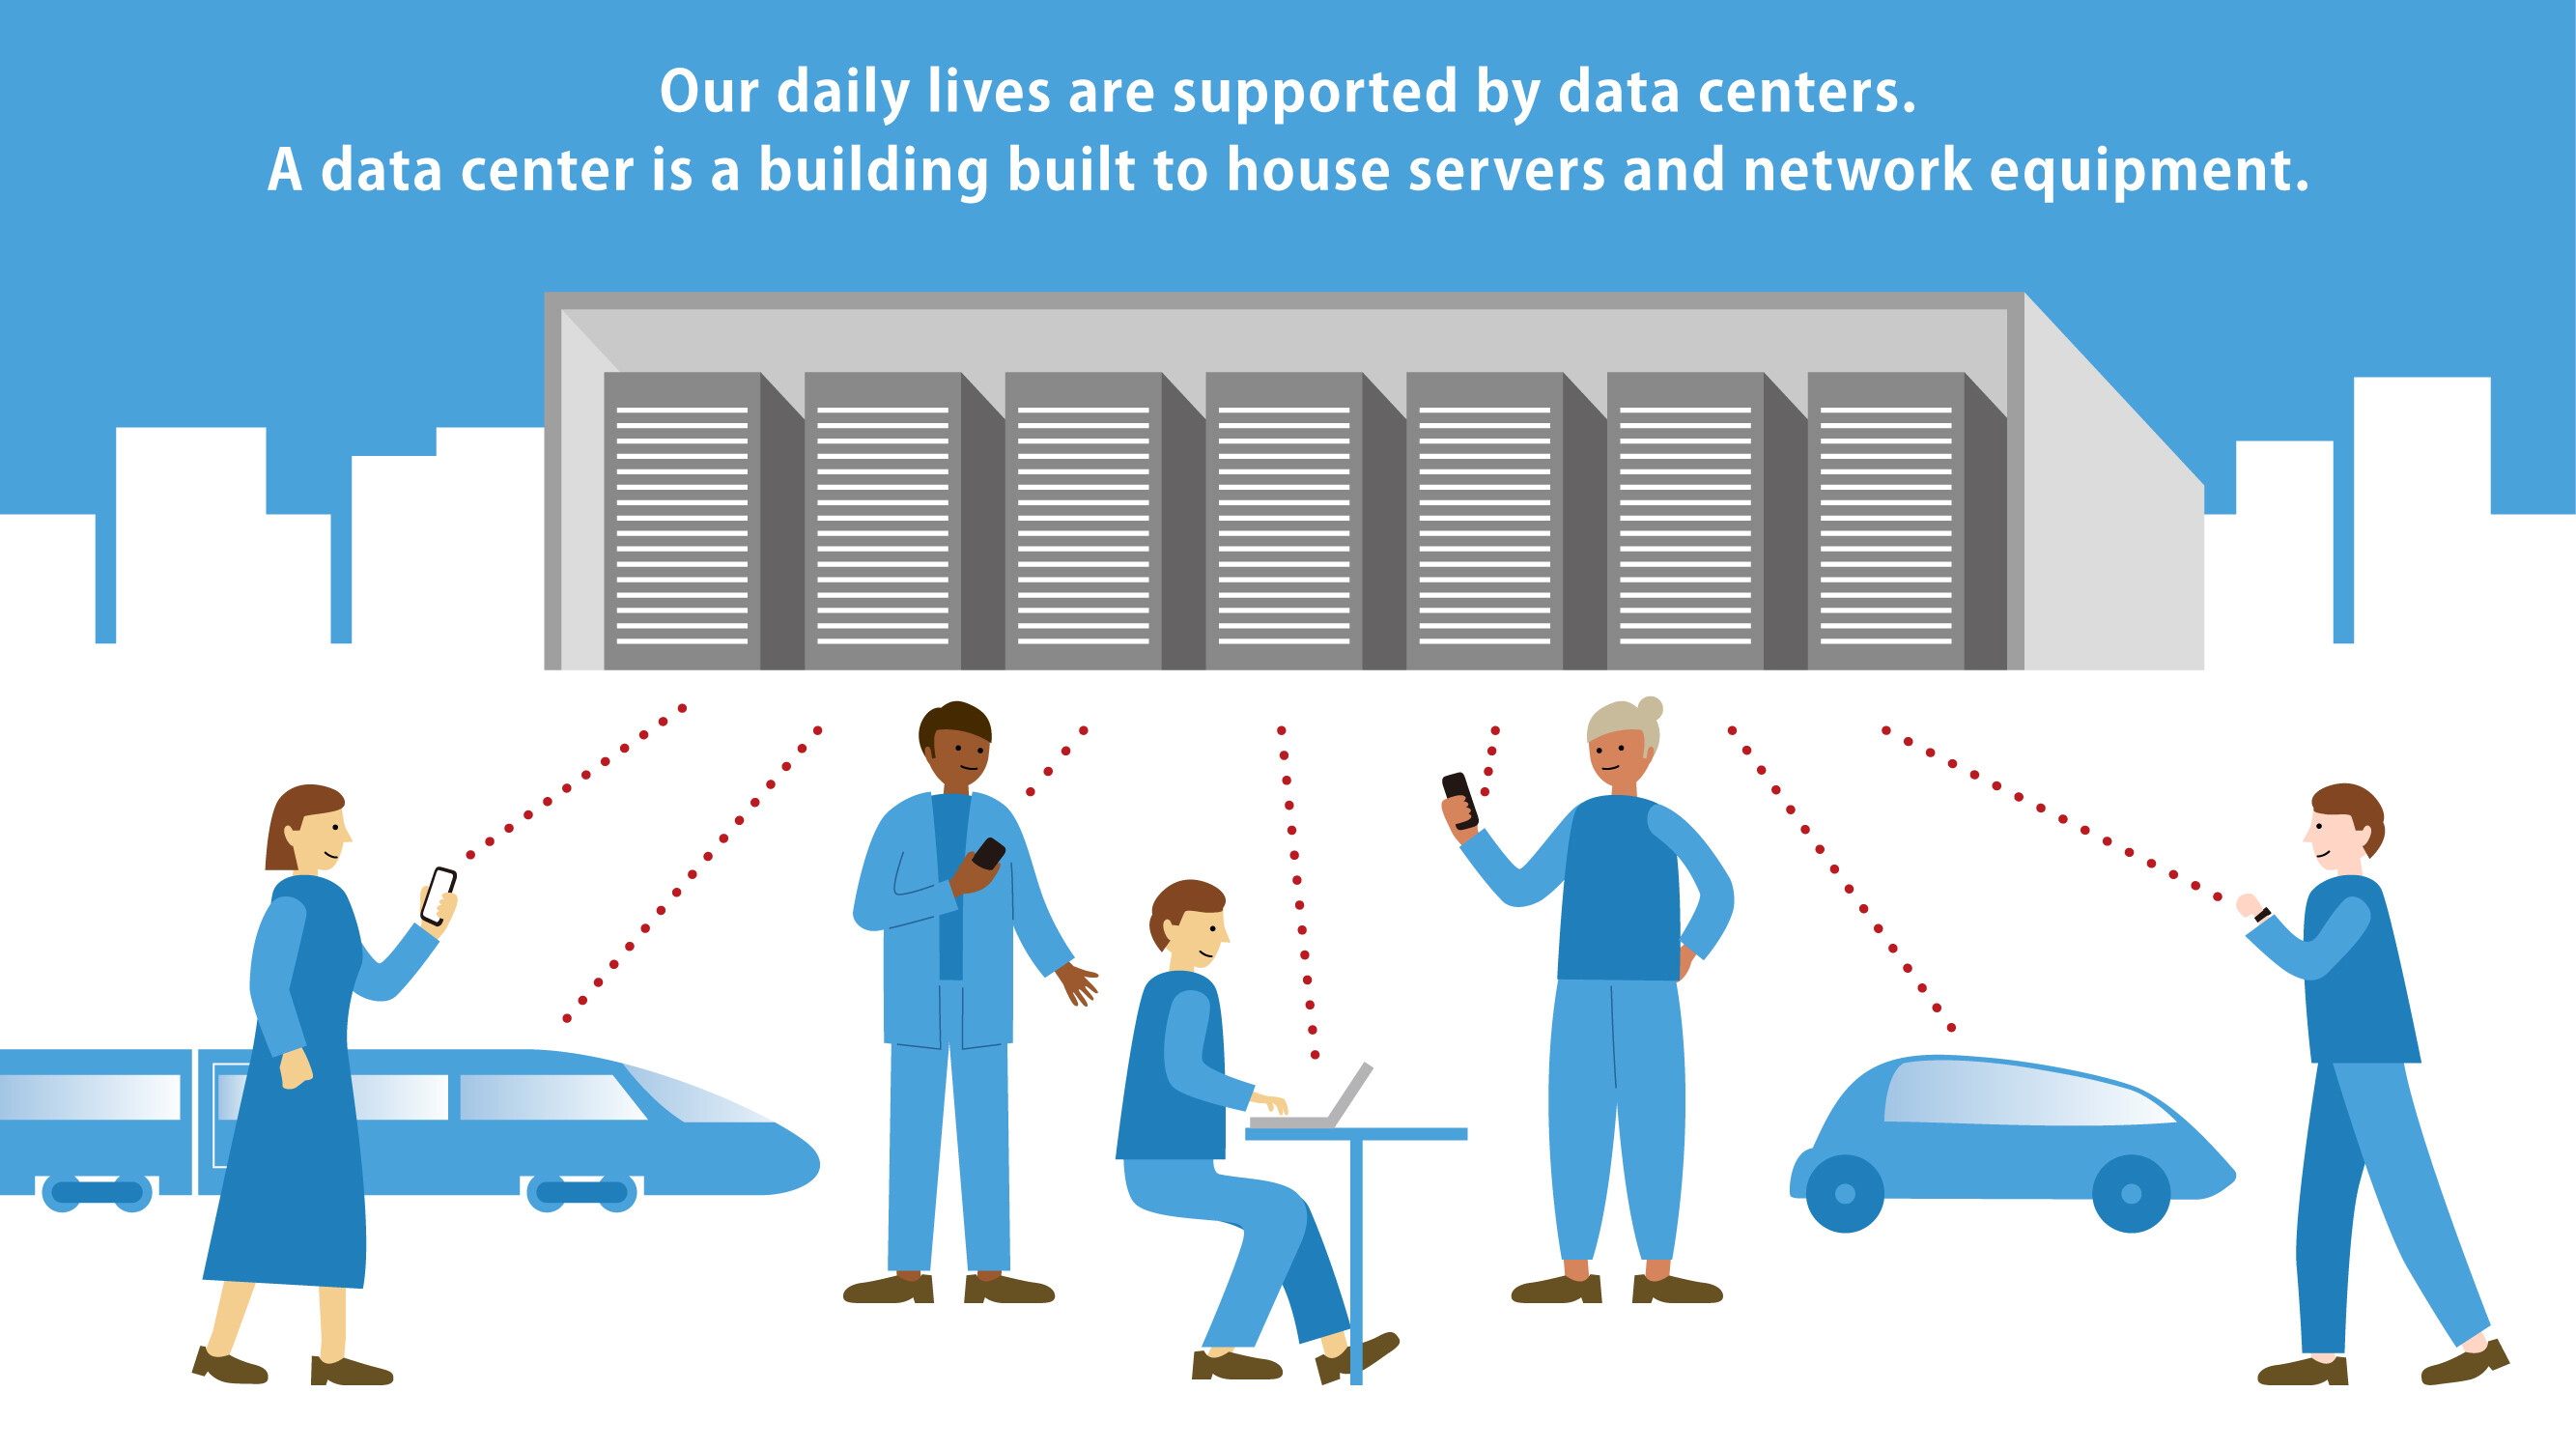 Images: (1) Data centers: the foundation of the digital society